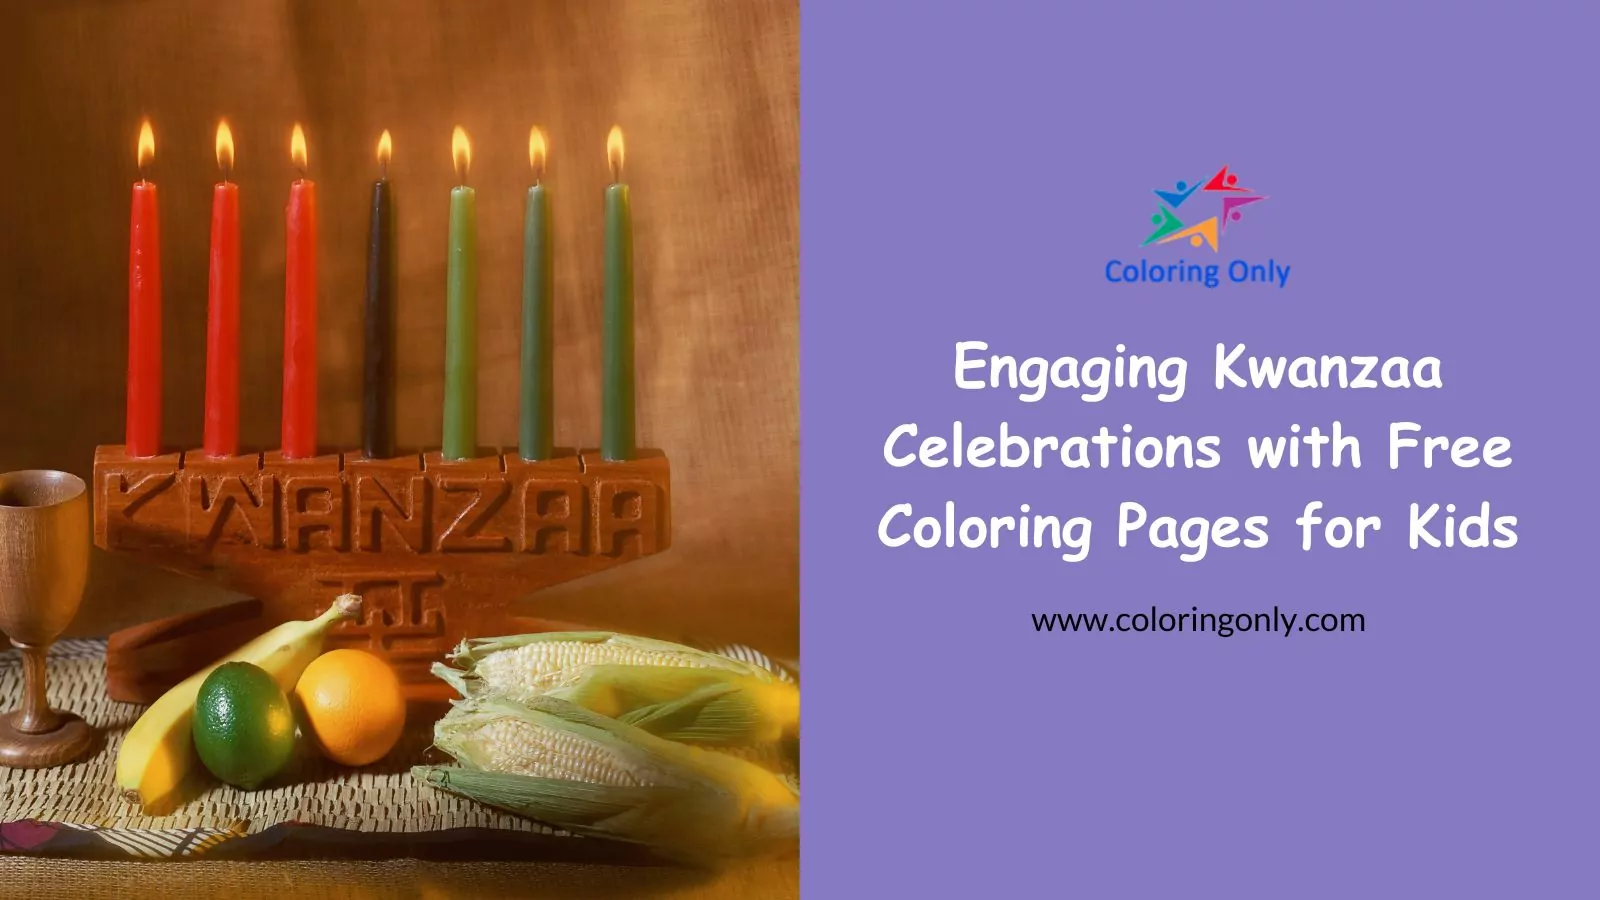 Engaging Kwanzaa Celebrations with Free Coloring Pages for Kids